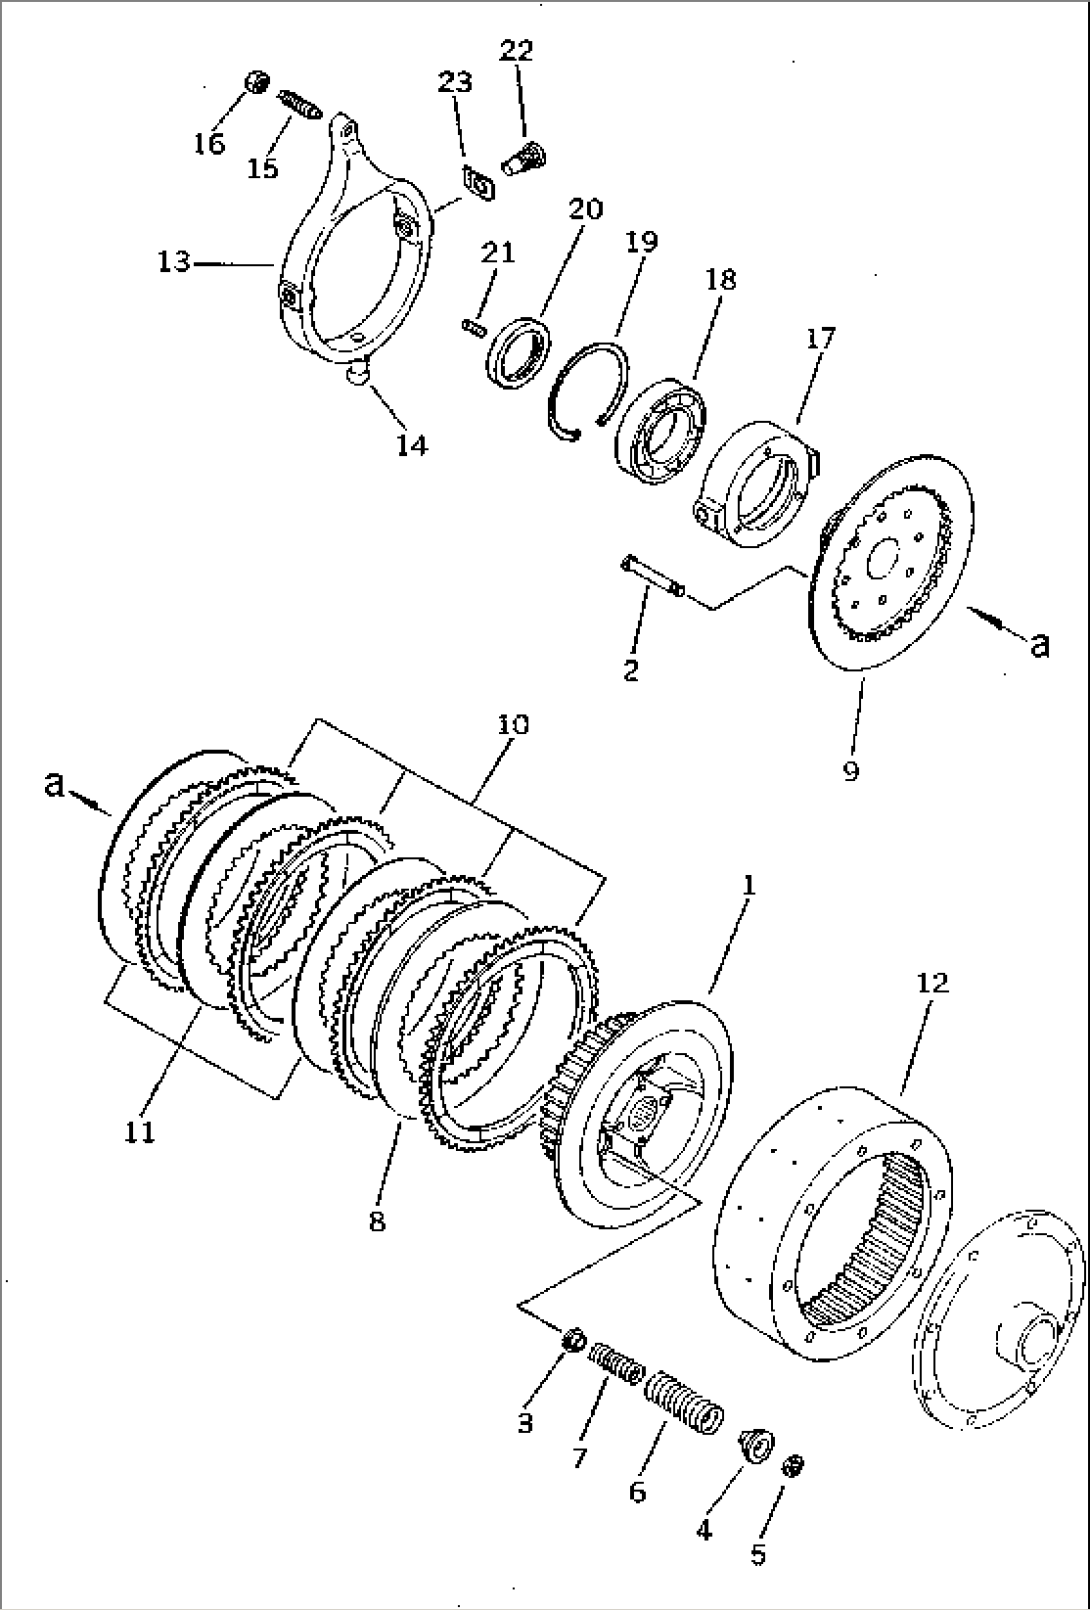 STEERING CLUTCH (FOR STRENGTHENED TRACK)